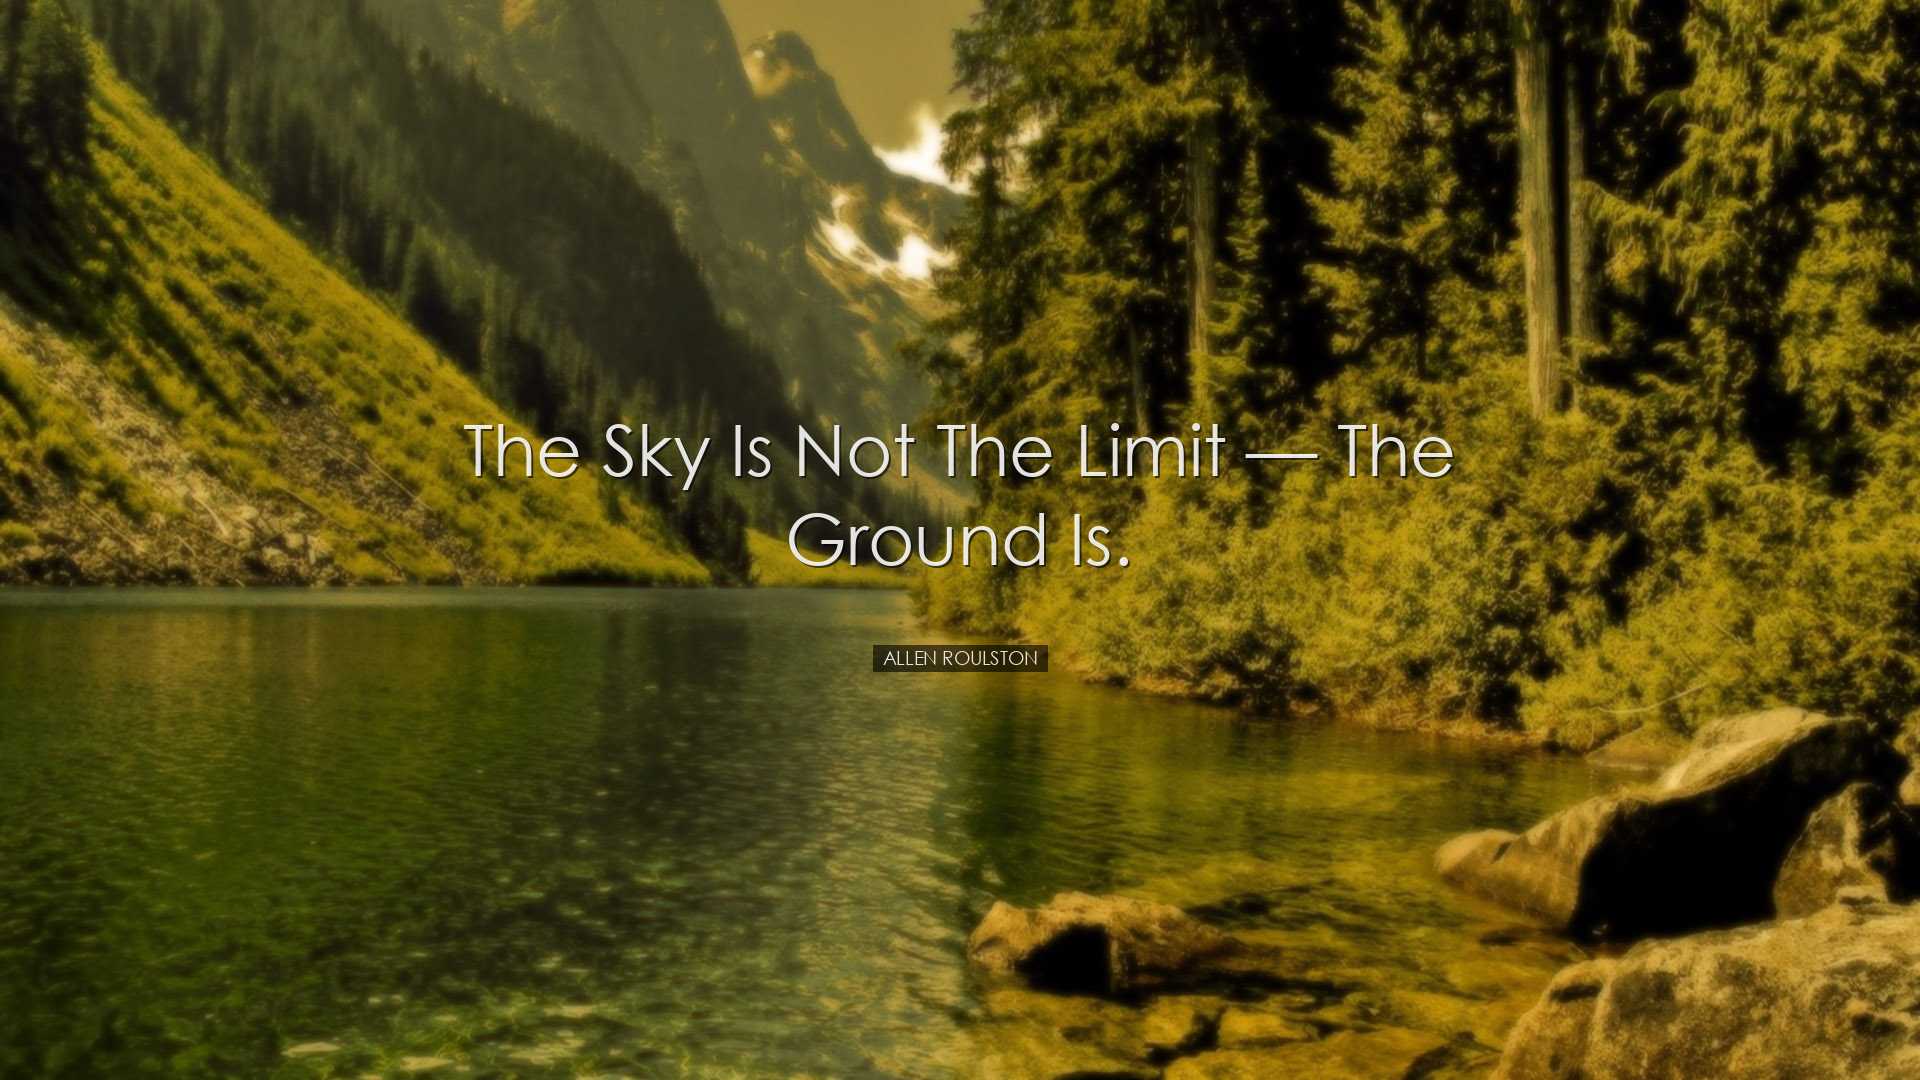 The sky is not the limit — the ground is. - Allen Roulston